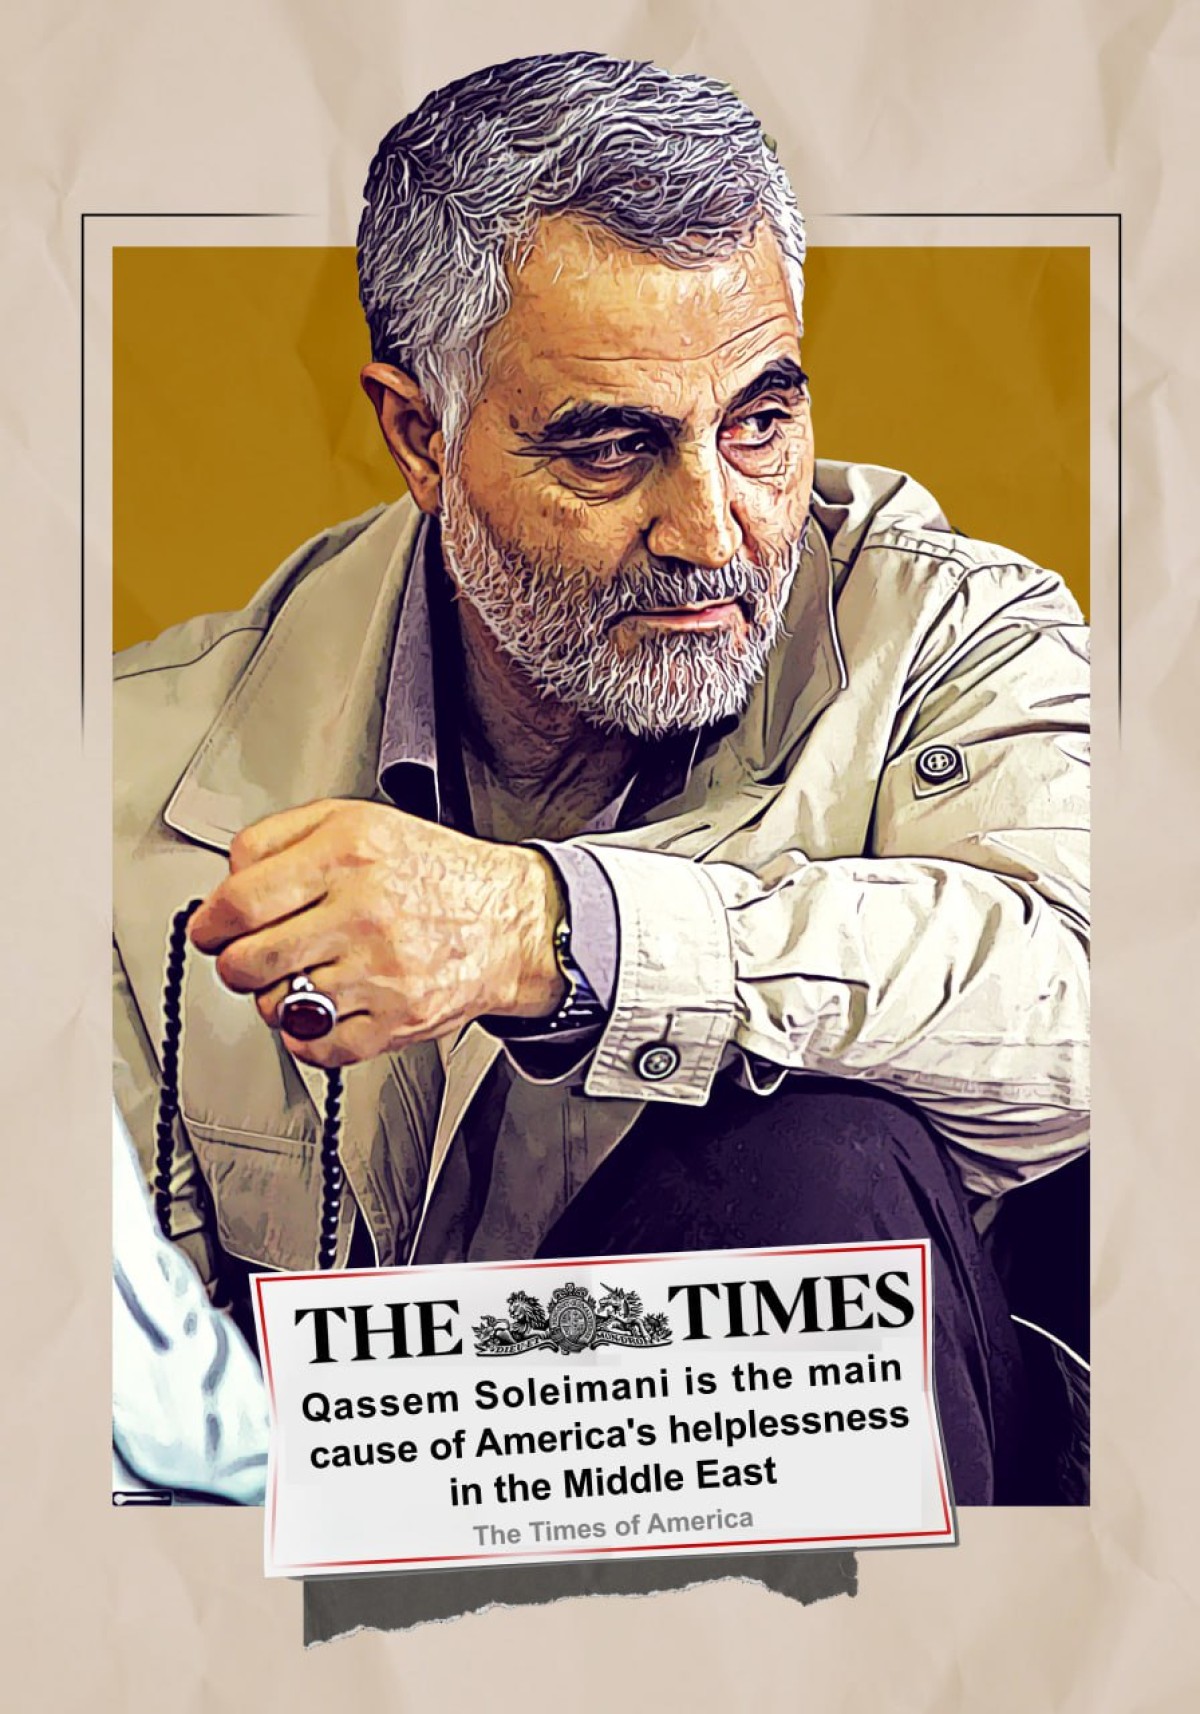 THE TIMES Qassem Soleimani is the main cause of America's helplessness in the Middle East